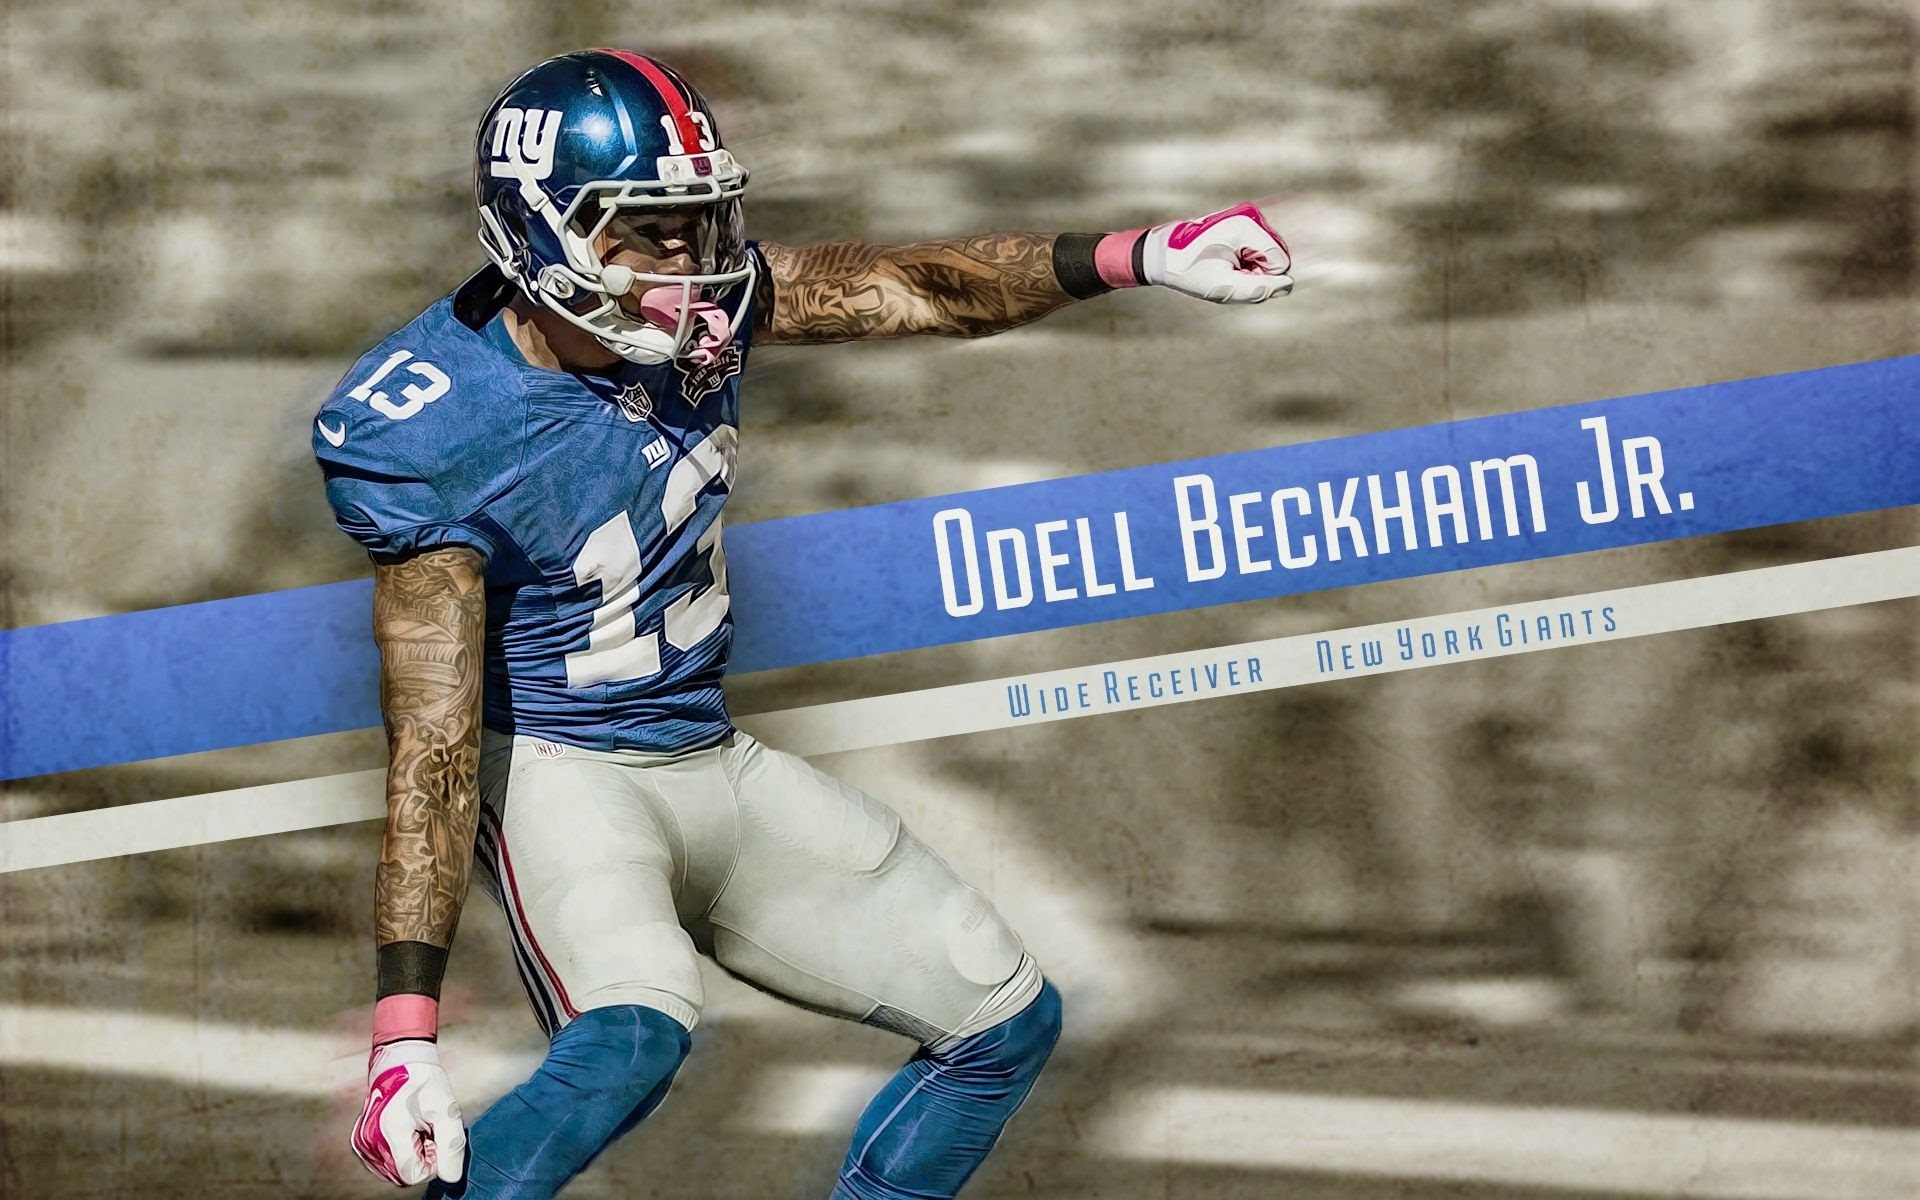 Odell Beckham Wallpaper ① Download Free Full Hd Wallpapers For